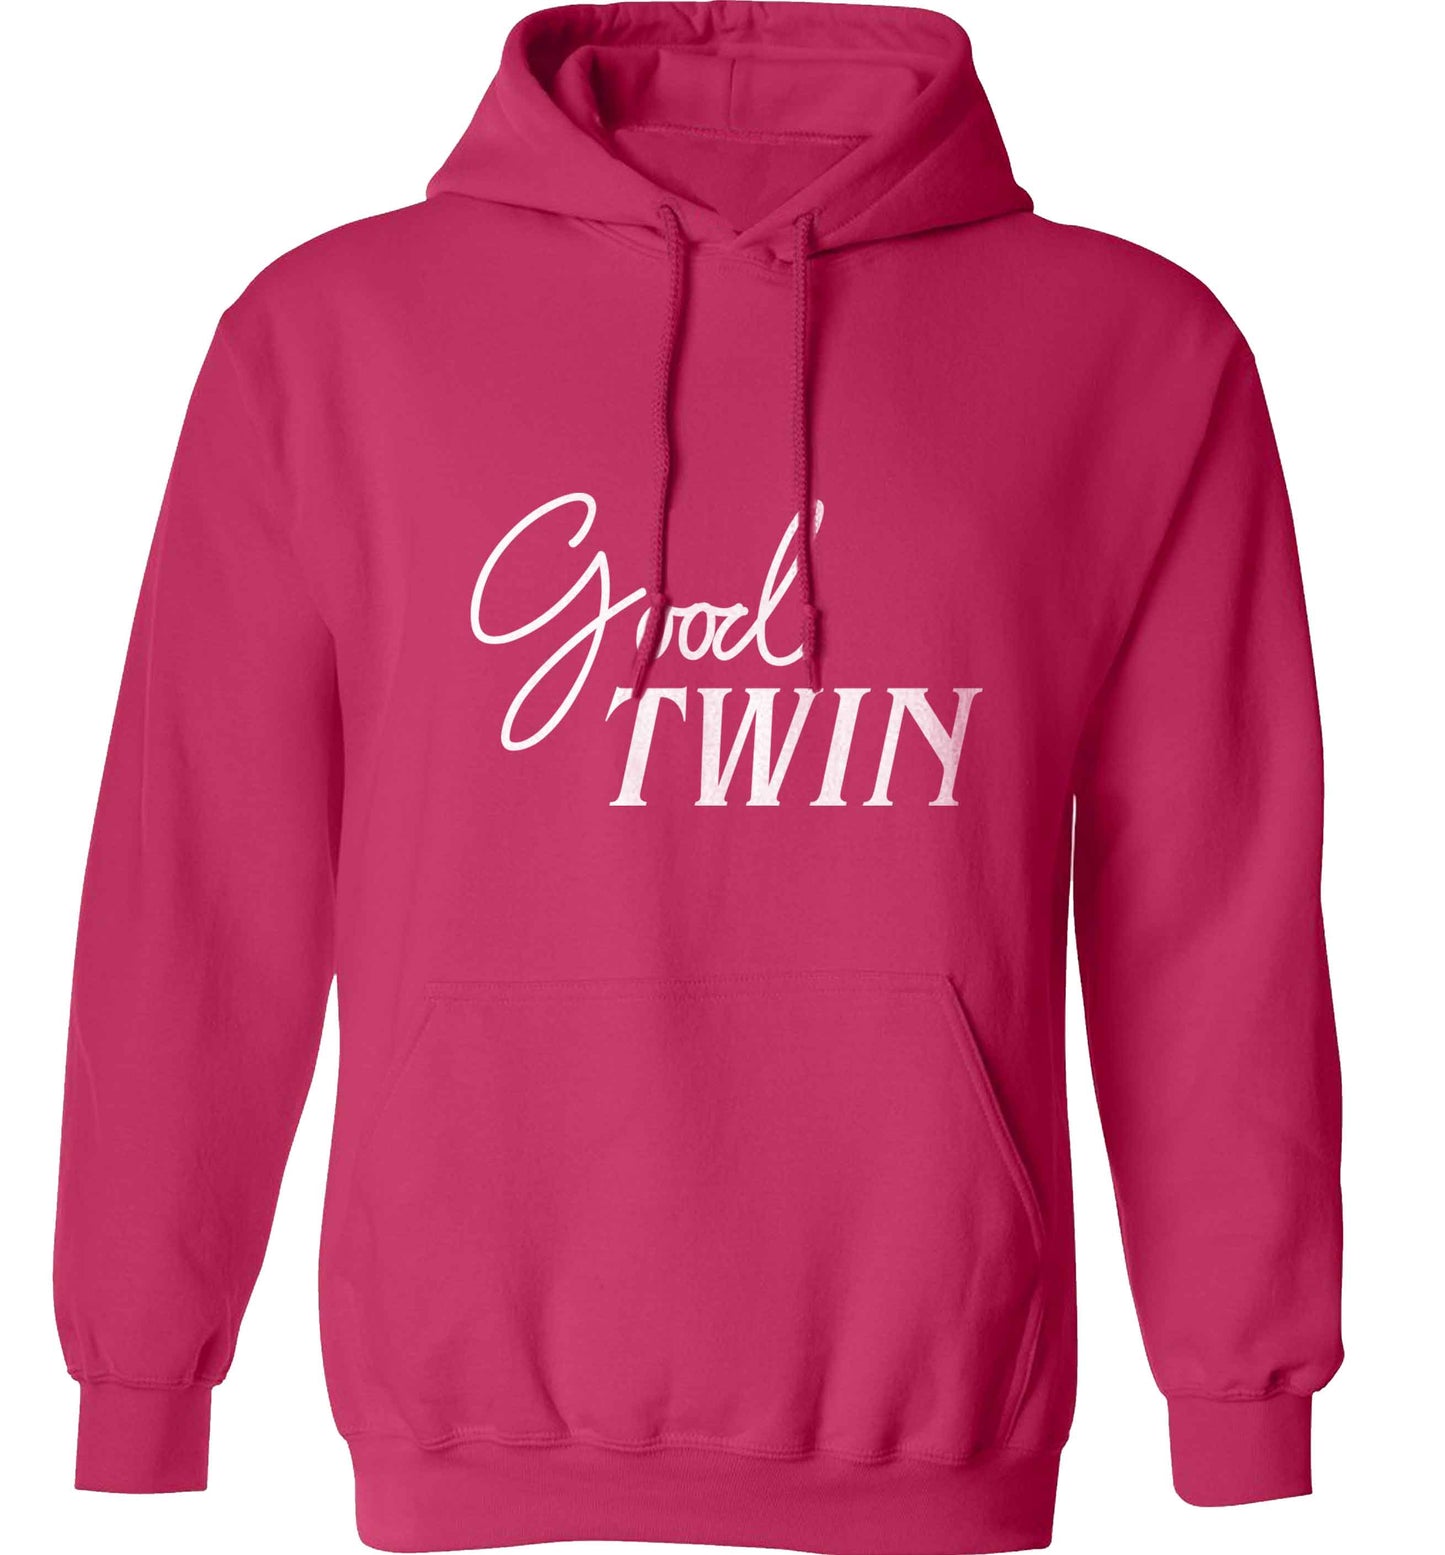 Good twin adults unisex pink hoodie 2XL